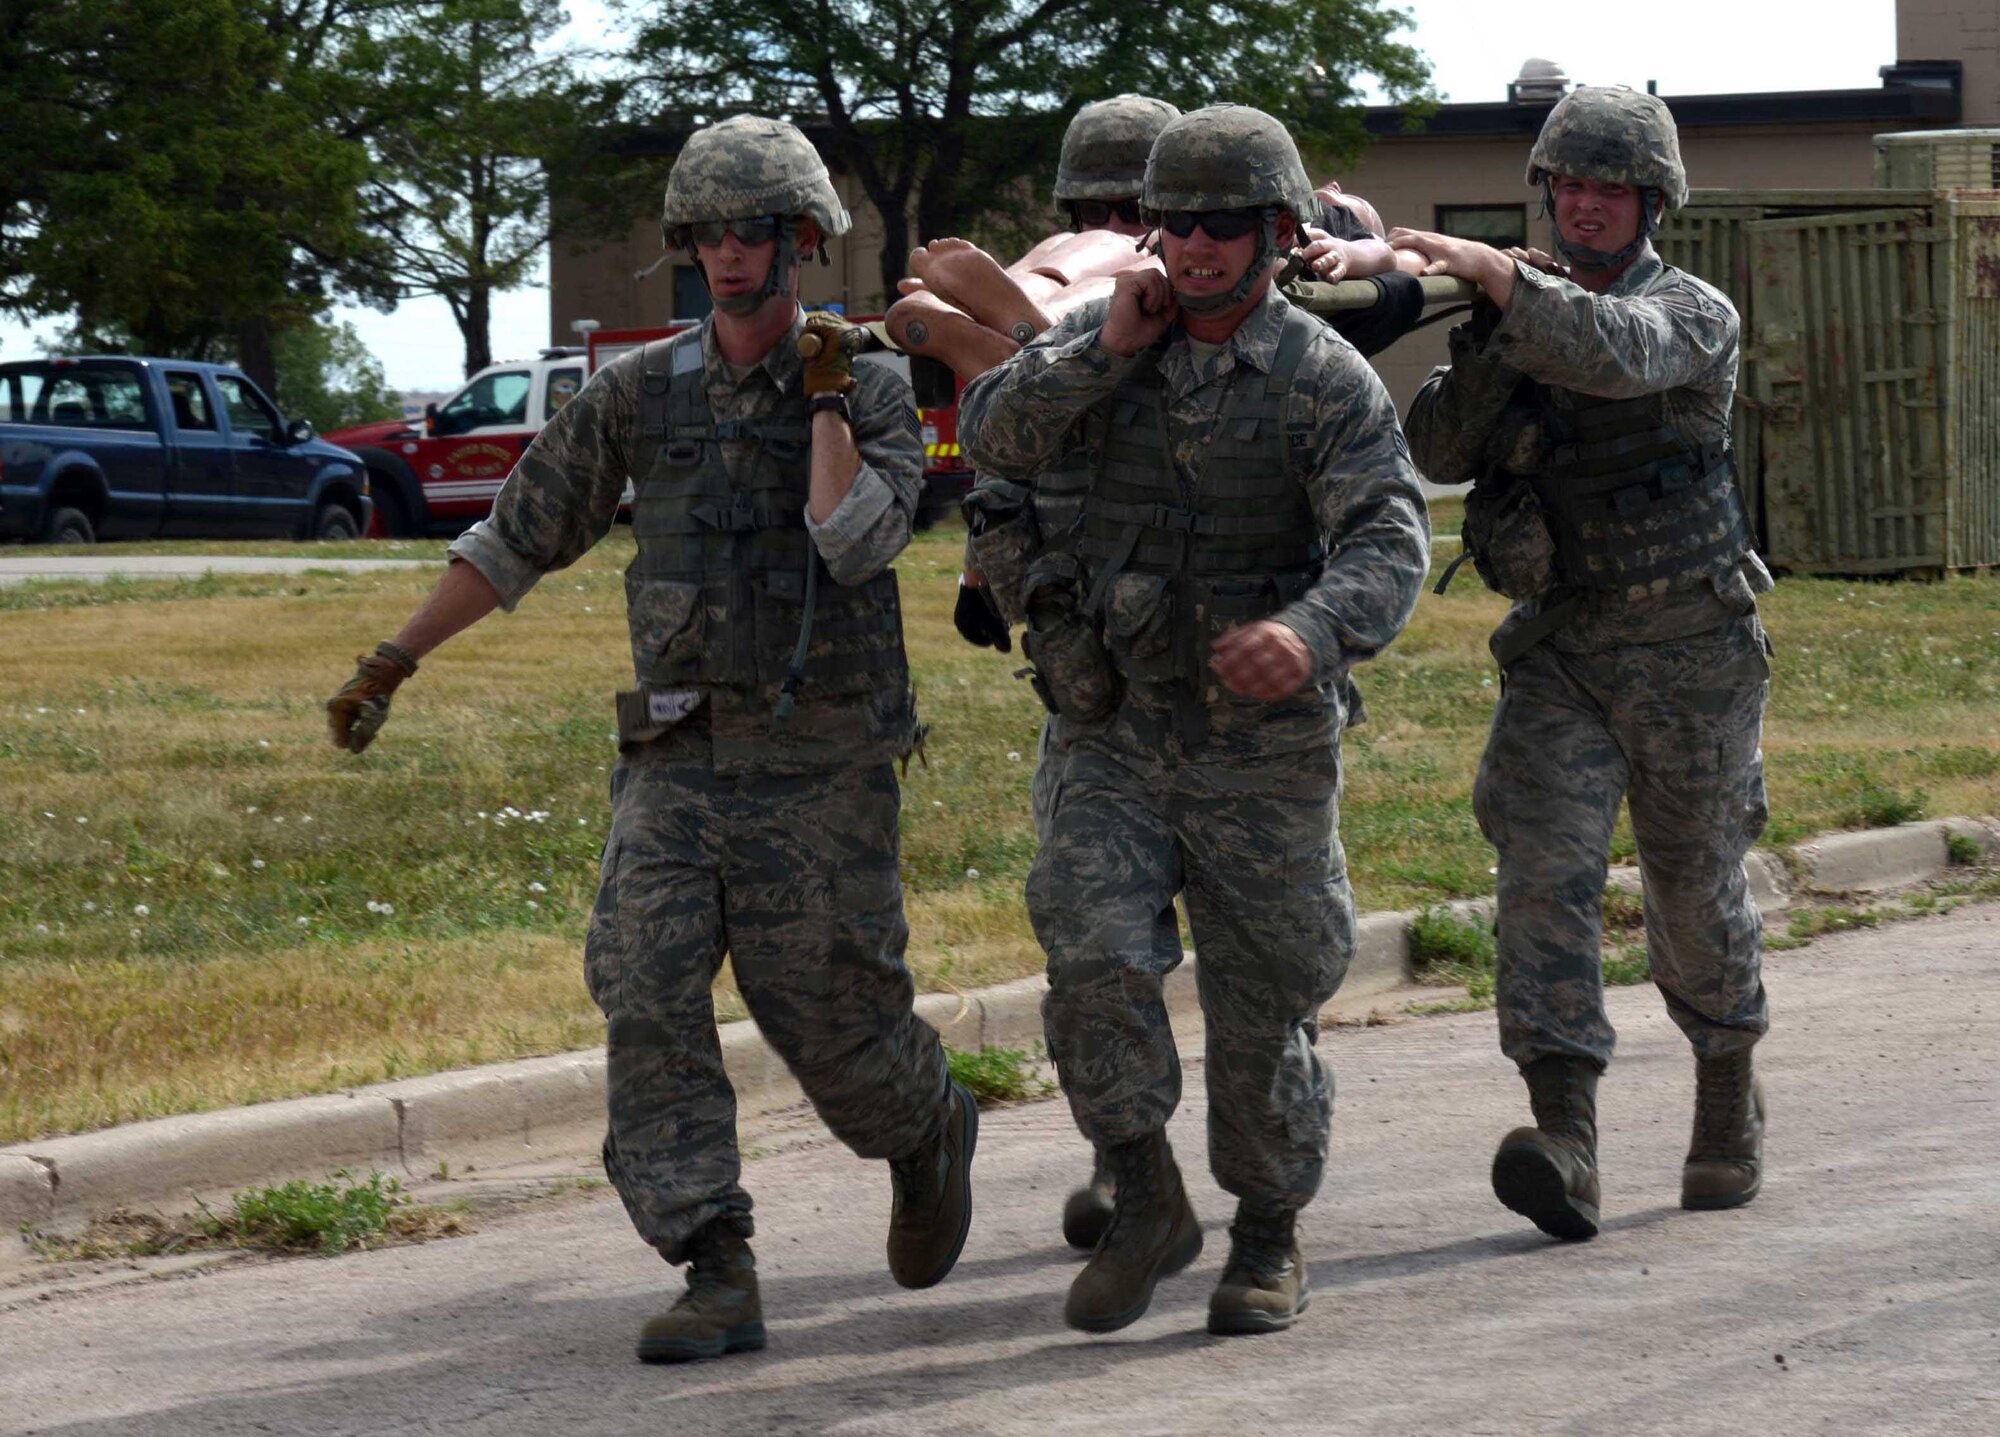 Airmen with the 28th Civil Engineer Squadron litter carry a training dummy during the Prime Base Engineer Emergency Force (BEEF) challenge at Ellsworth Air Force Base, S.D., July 22, 2016. The purpose of the Prime BEEF challenge is a way to put field experience to the test in a competitive environment. (U.S. Air Force photo by Airman Donald Knechtel)